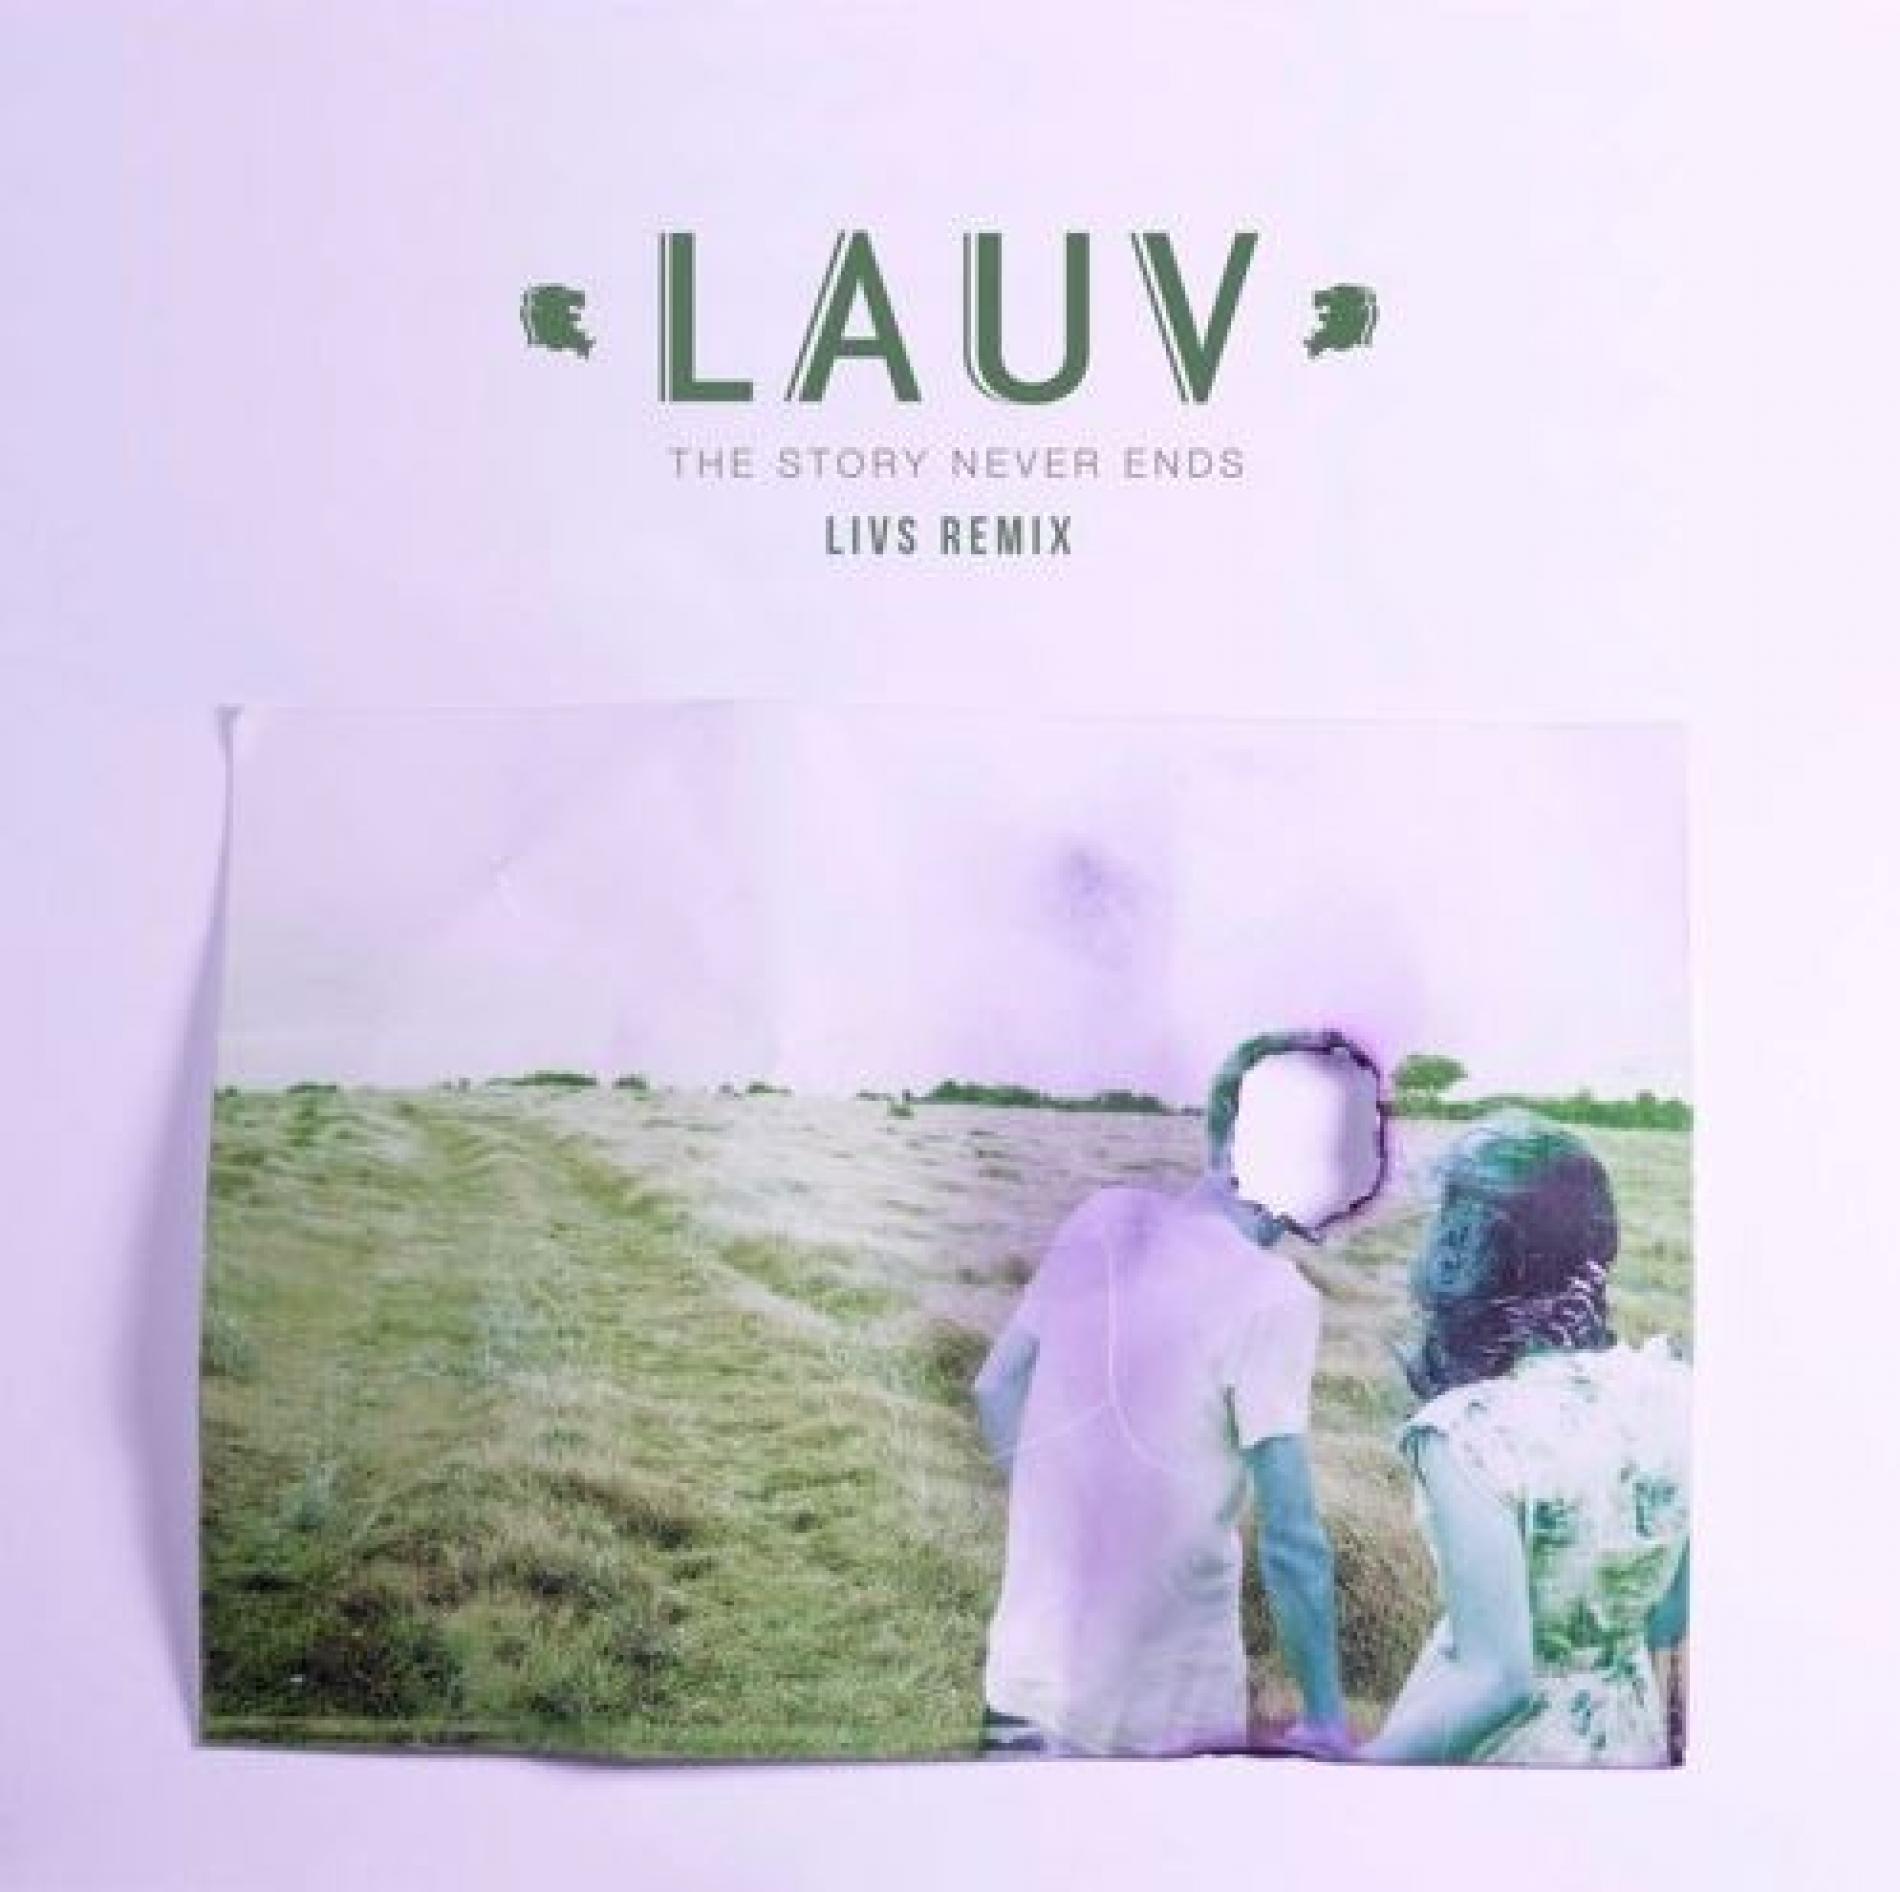 lauv – the story never ends (livs remix)